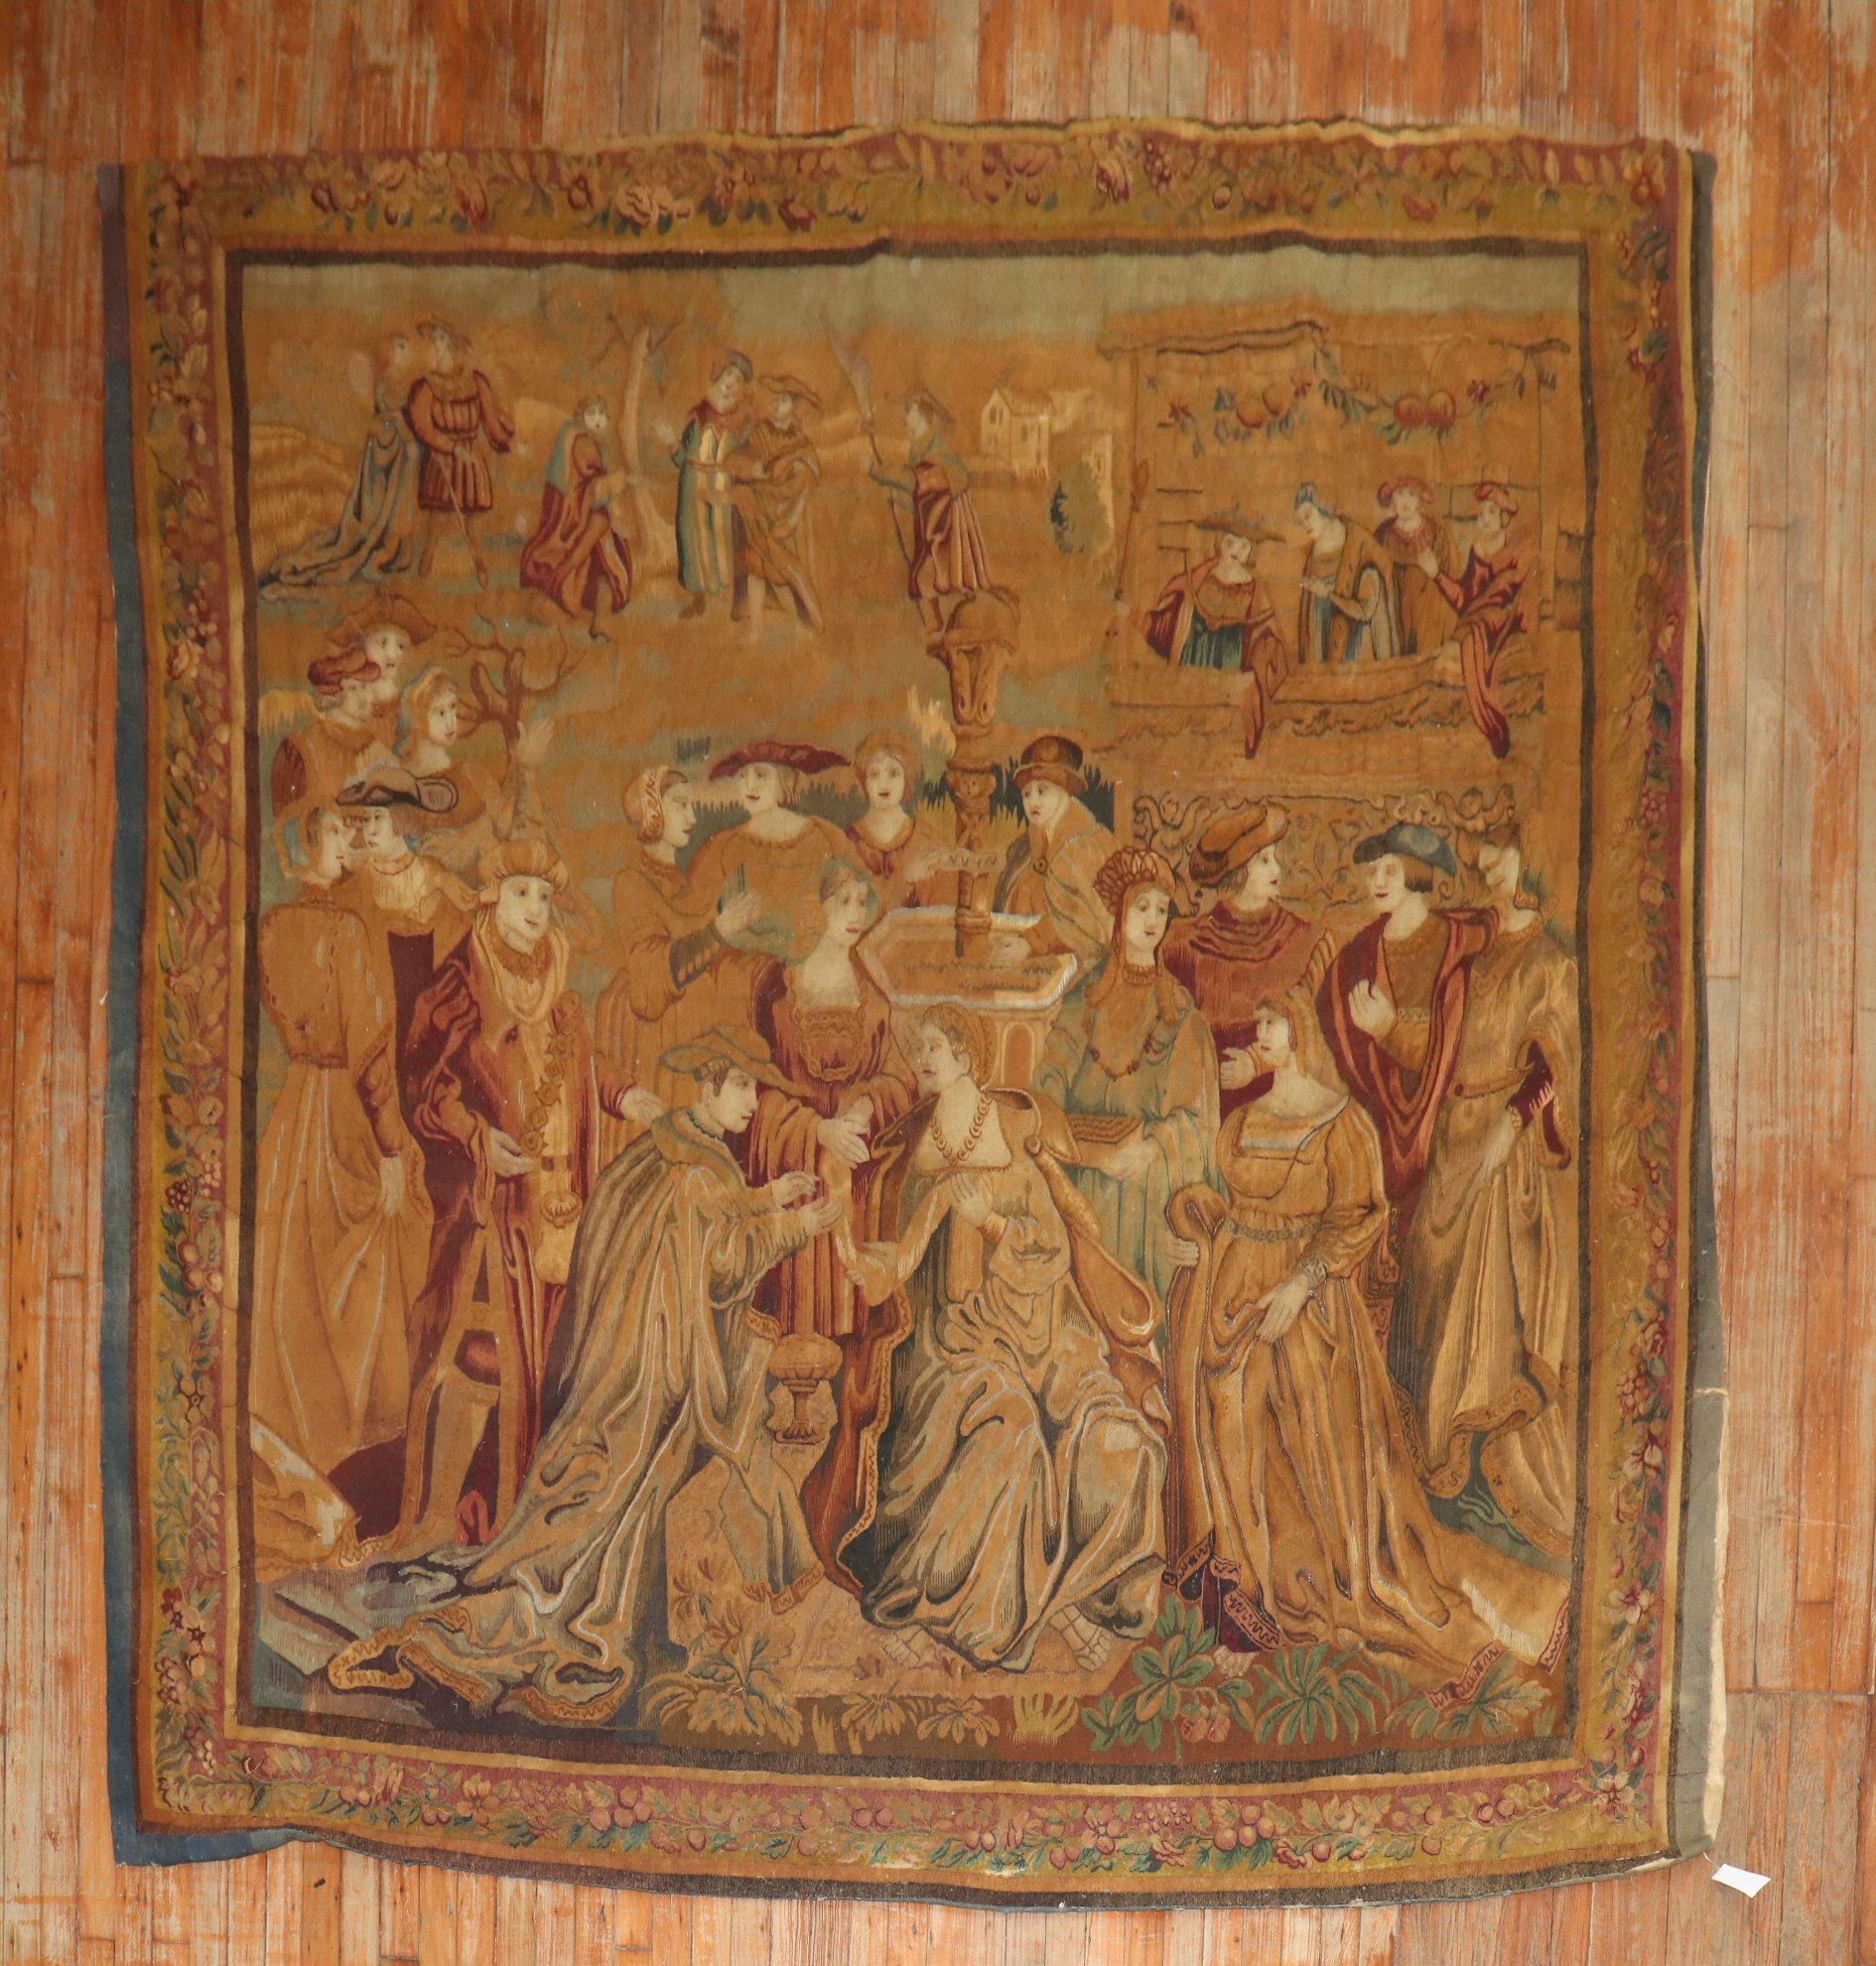 Late 19th century French Tapestry

Measures: 7'10